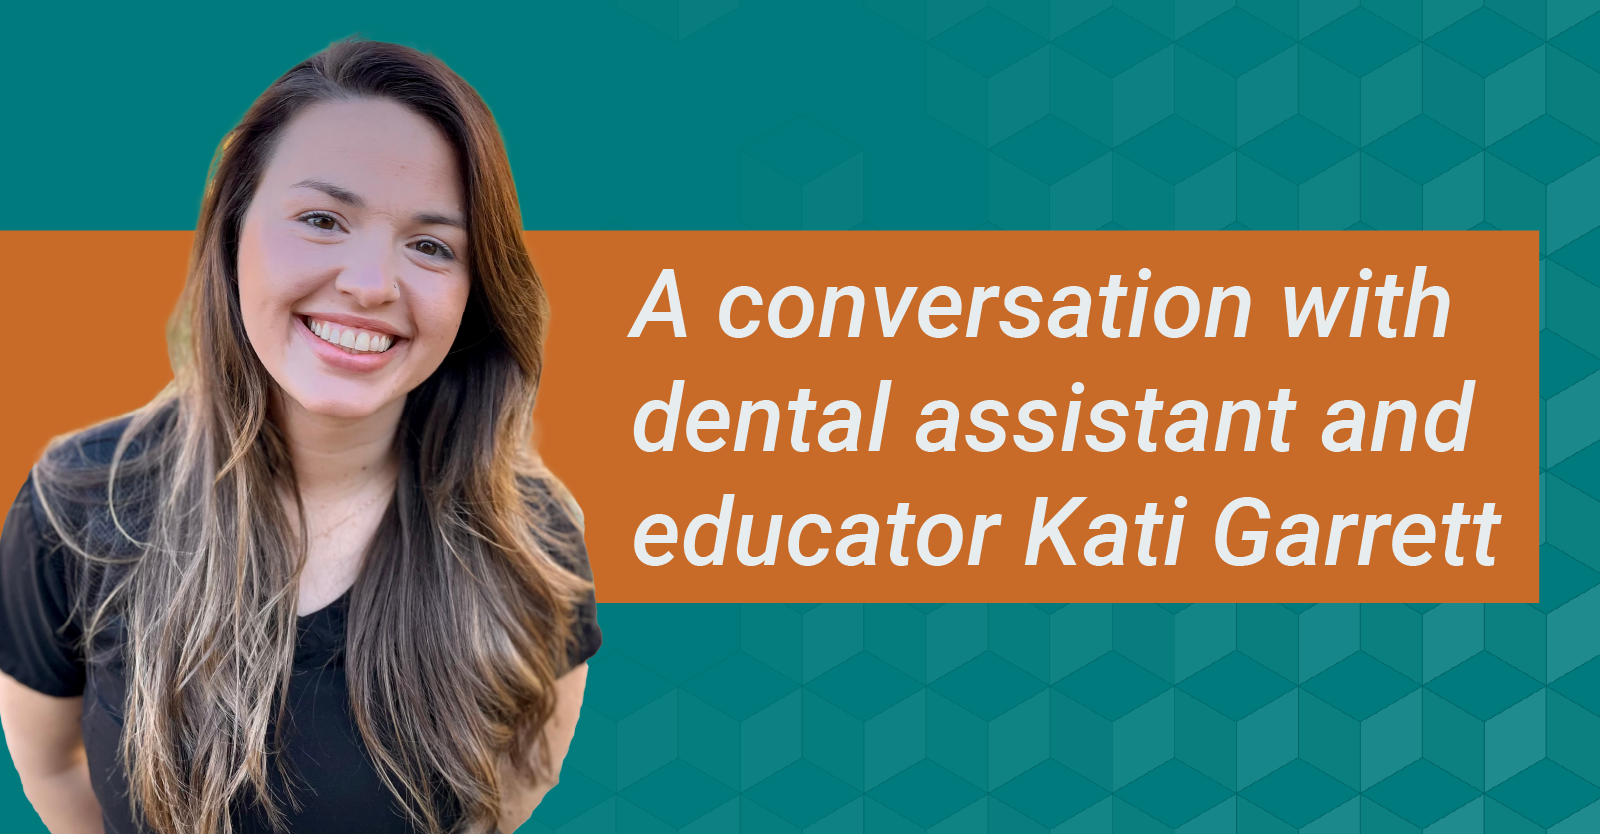 What is a Dental Assistant?